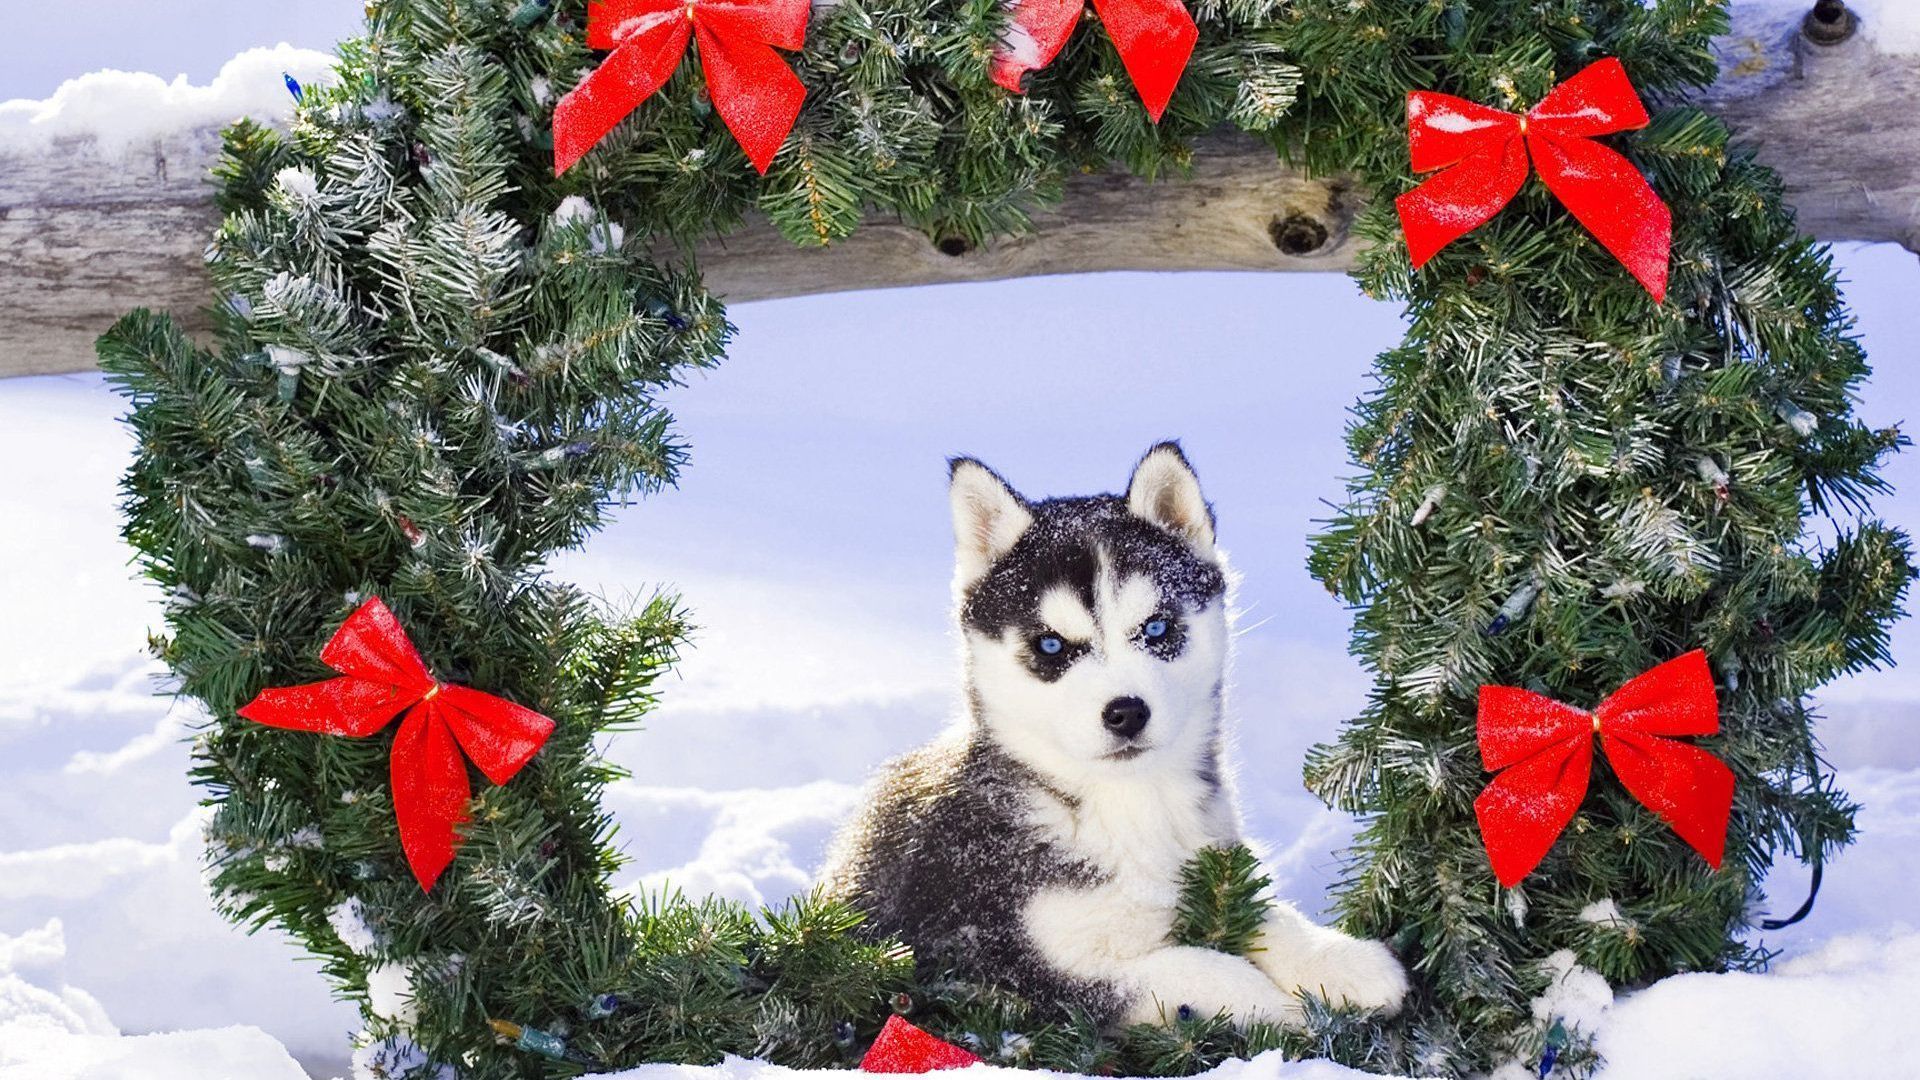 HD Wallpaper. Dog breeds picture, Dog holiday, Christmas puppy